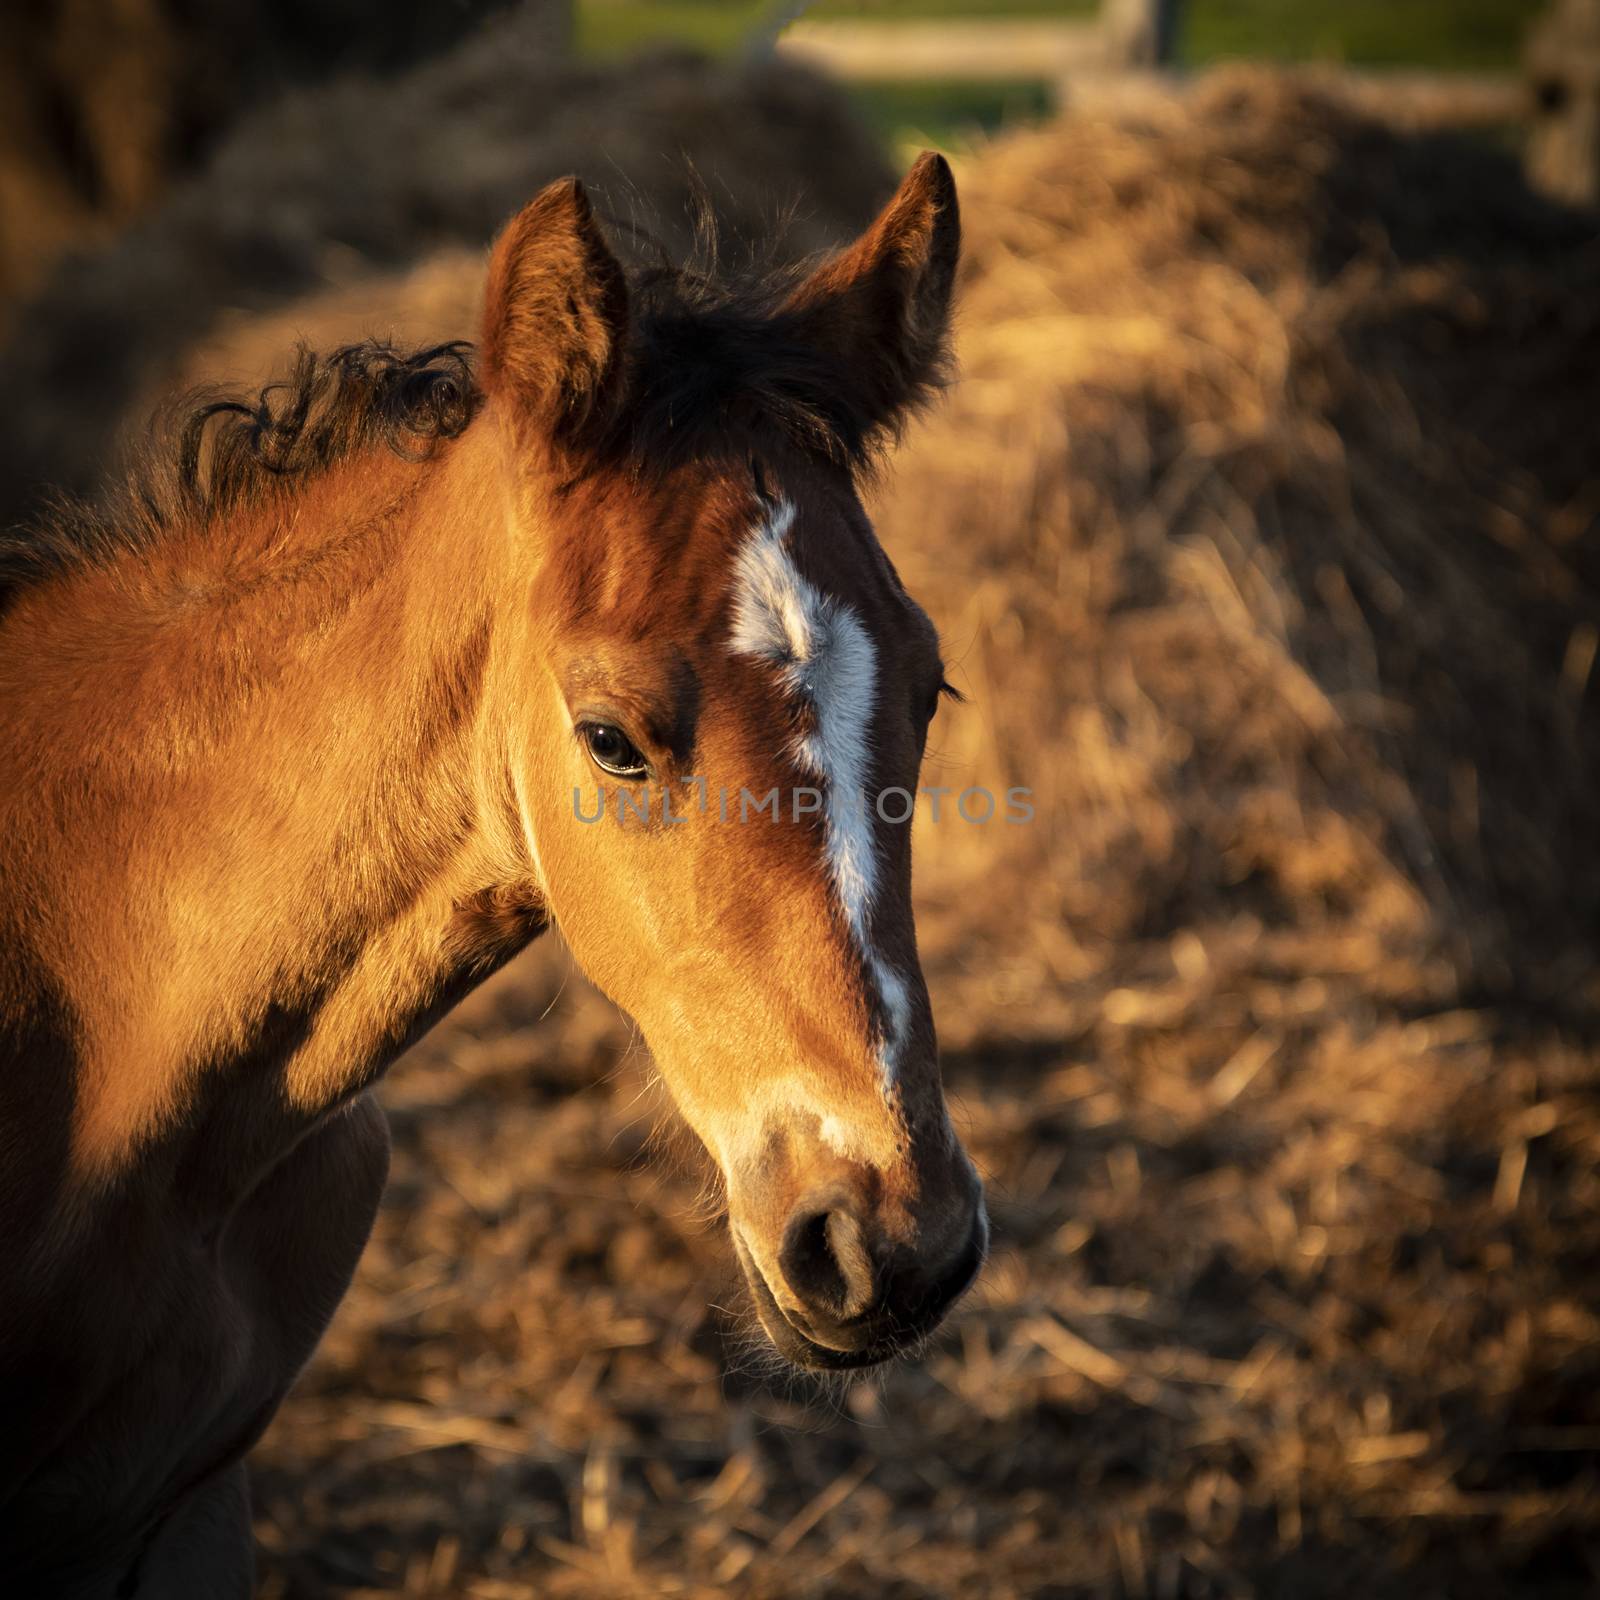 Icelandic horse foal in evening sunlight looking into the camera by sveter